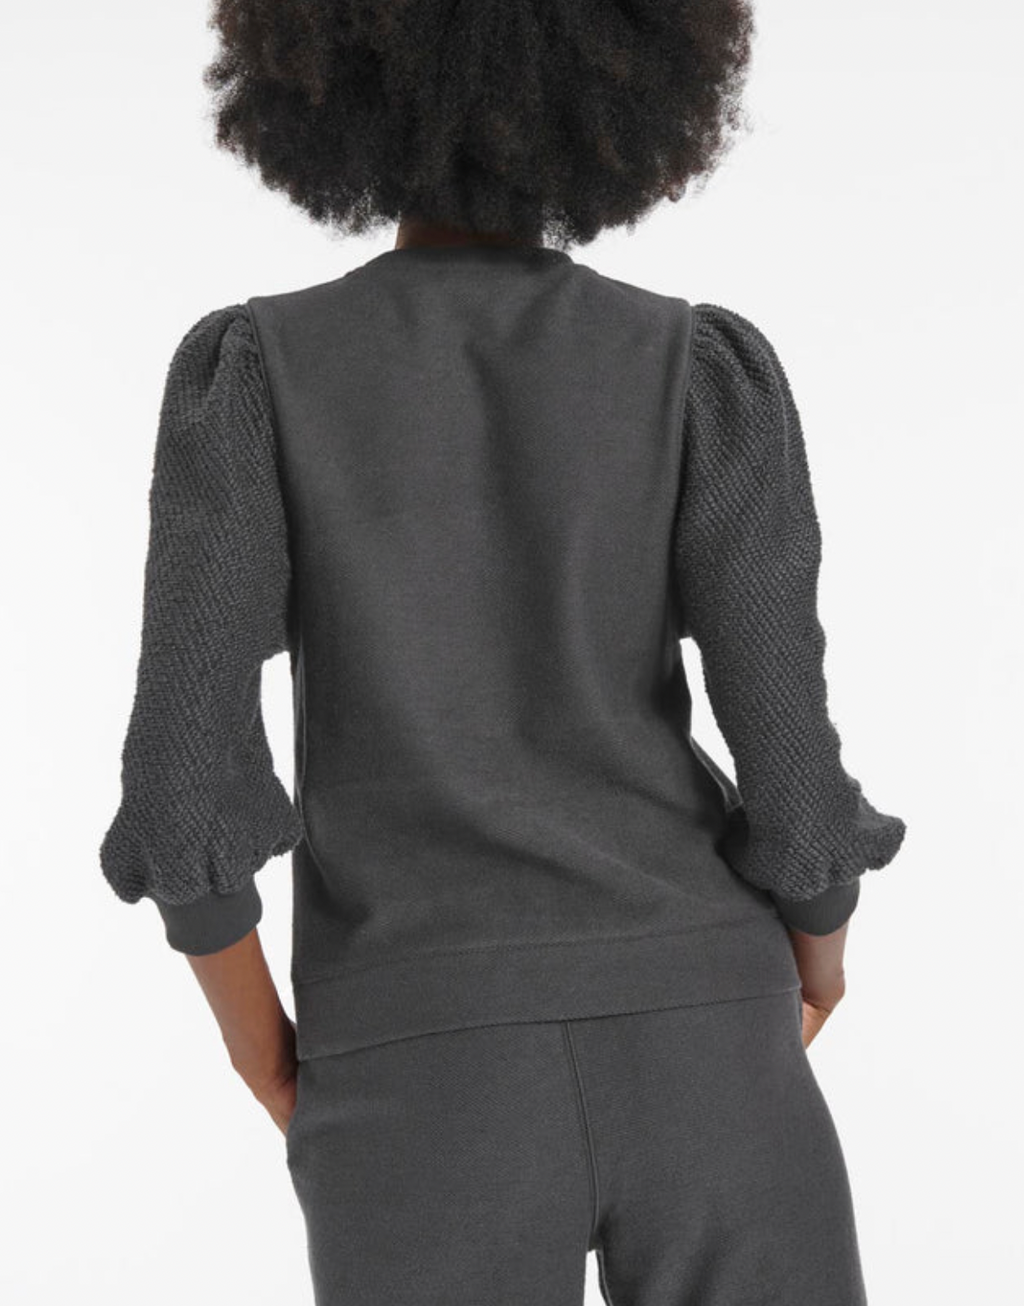 Evelyn Terry Pullover- Lead Grey**FINAL SALE**